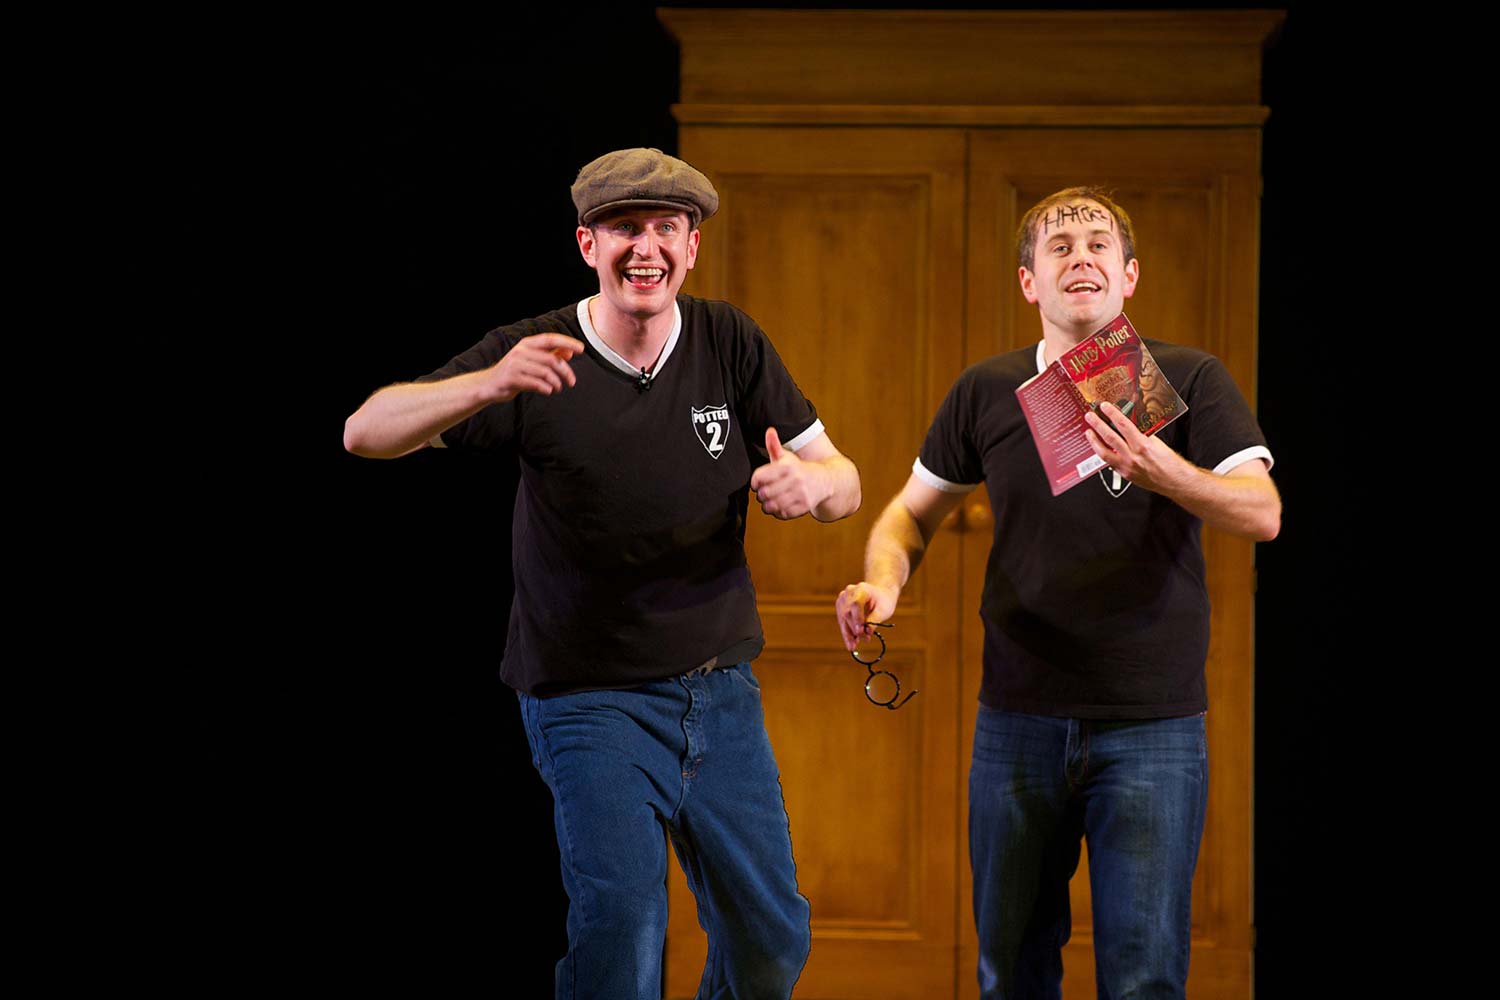 Potted Potter – The Unauthorised Harry Experience – A Parody by Dan and Jeff